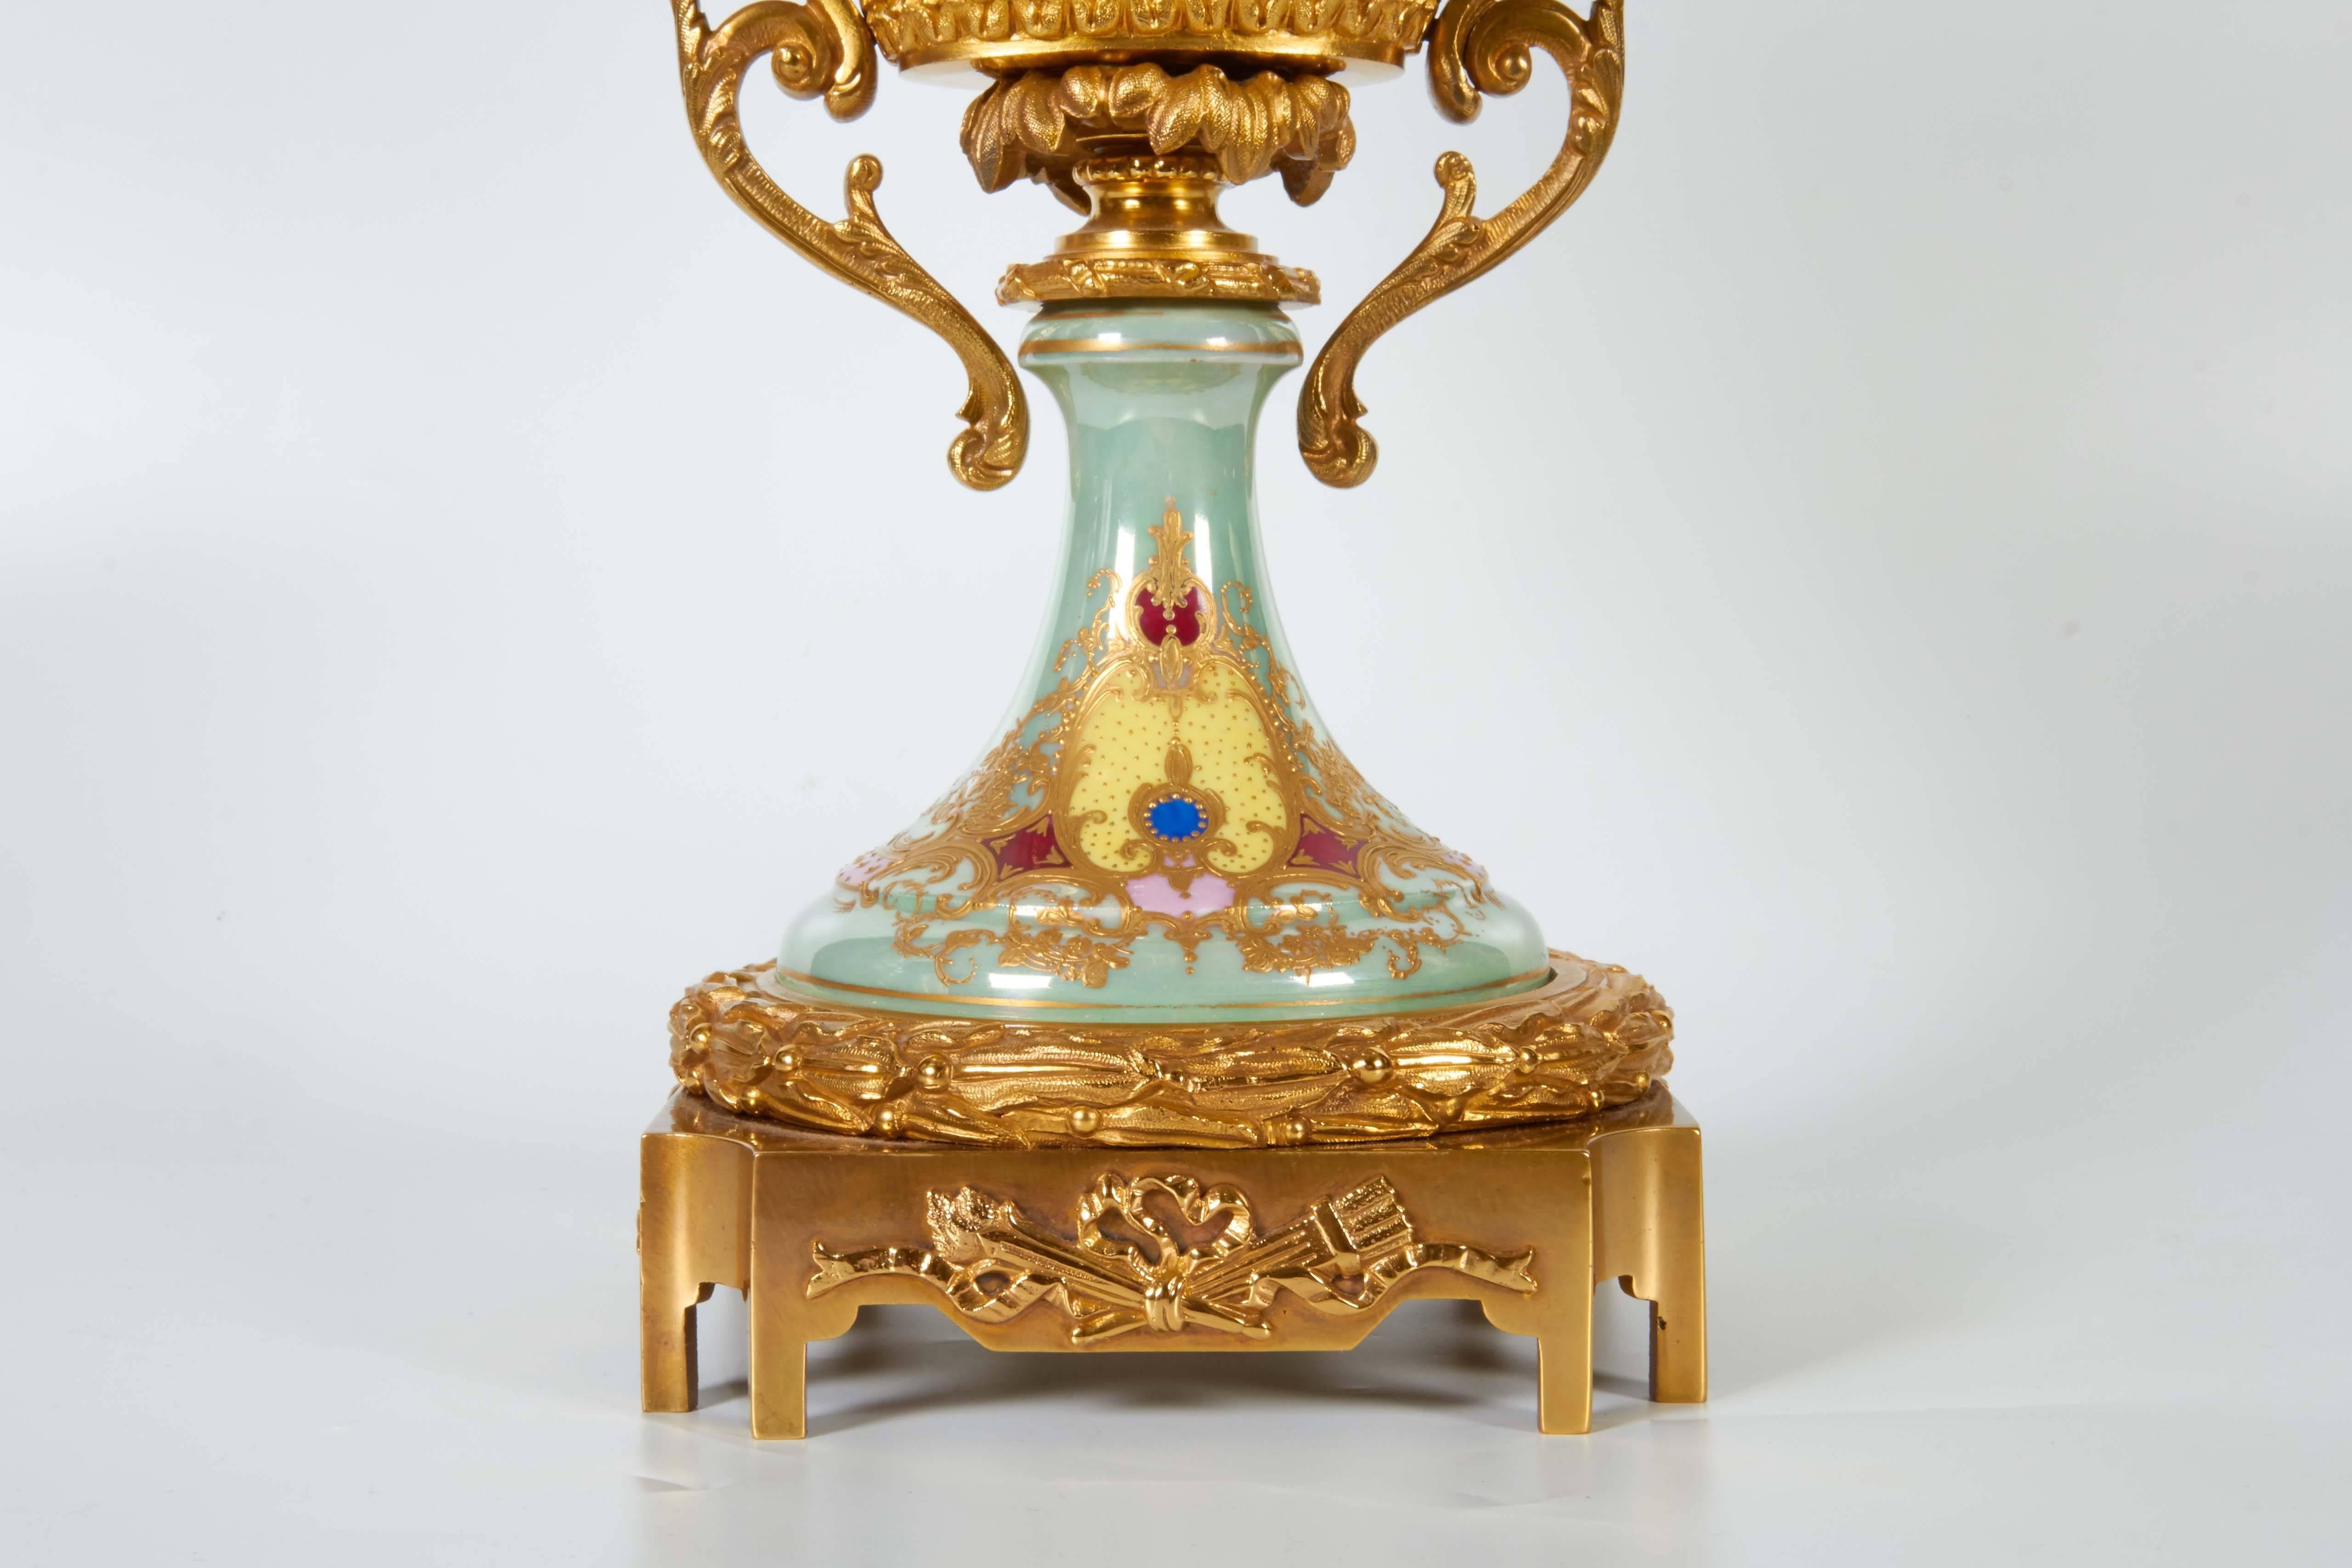 An unusual antique French iridescent Sèvres Porcelain and ormolu-mounted oval shaped centerpiece, the light jade green iridescent color Sèvres Porcelain painted with a beautiful scene of a beauty amidst cupids with flowers and butterflies, the